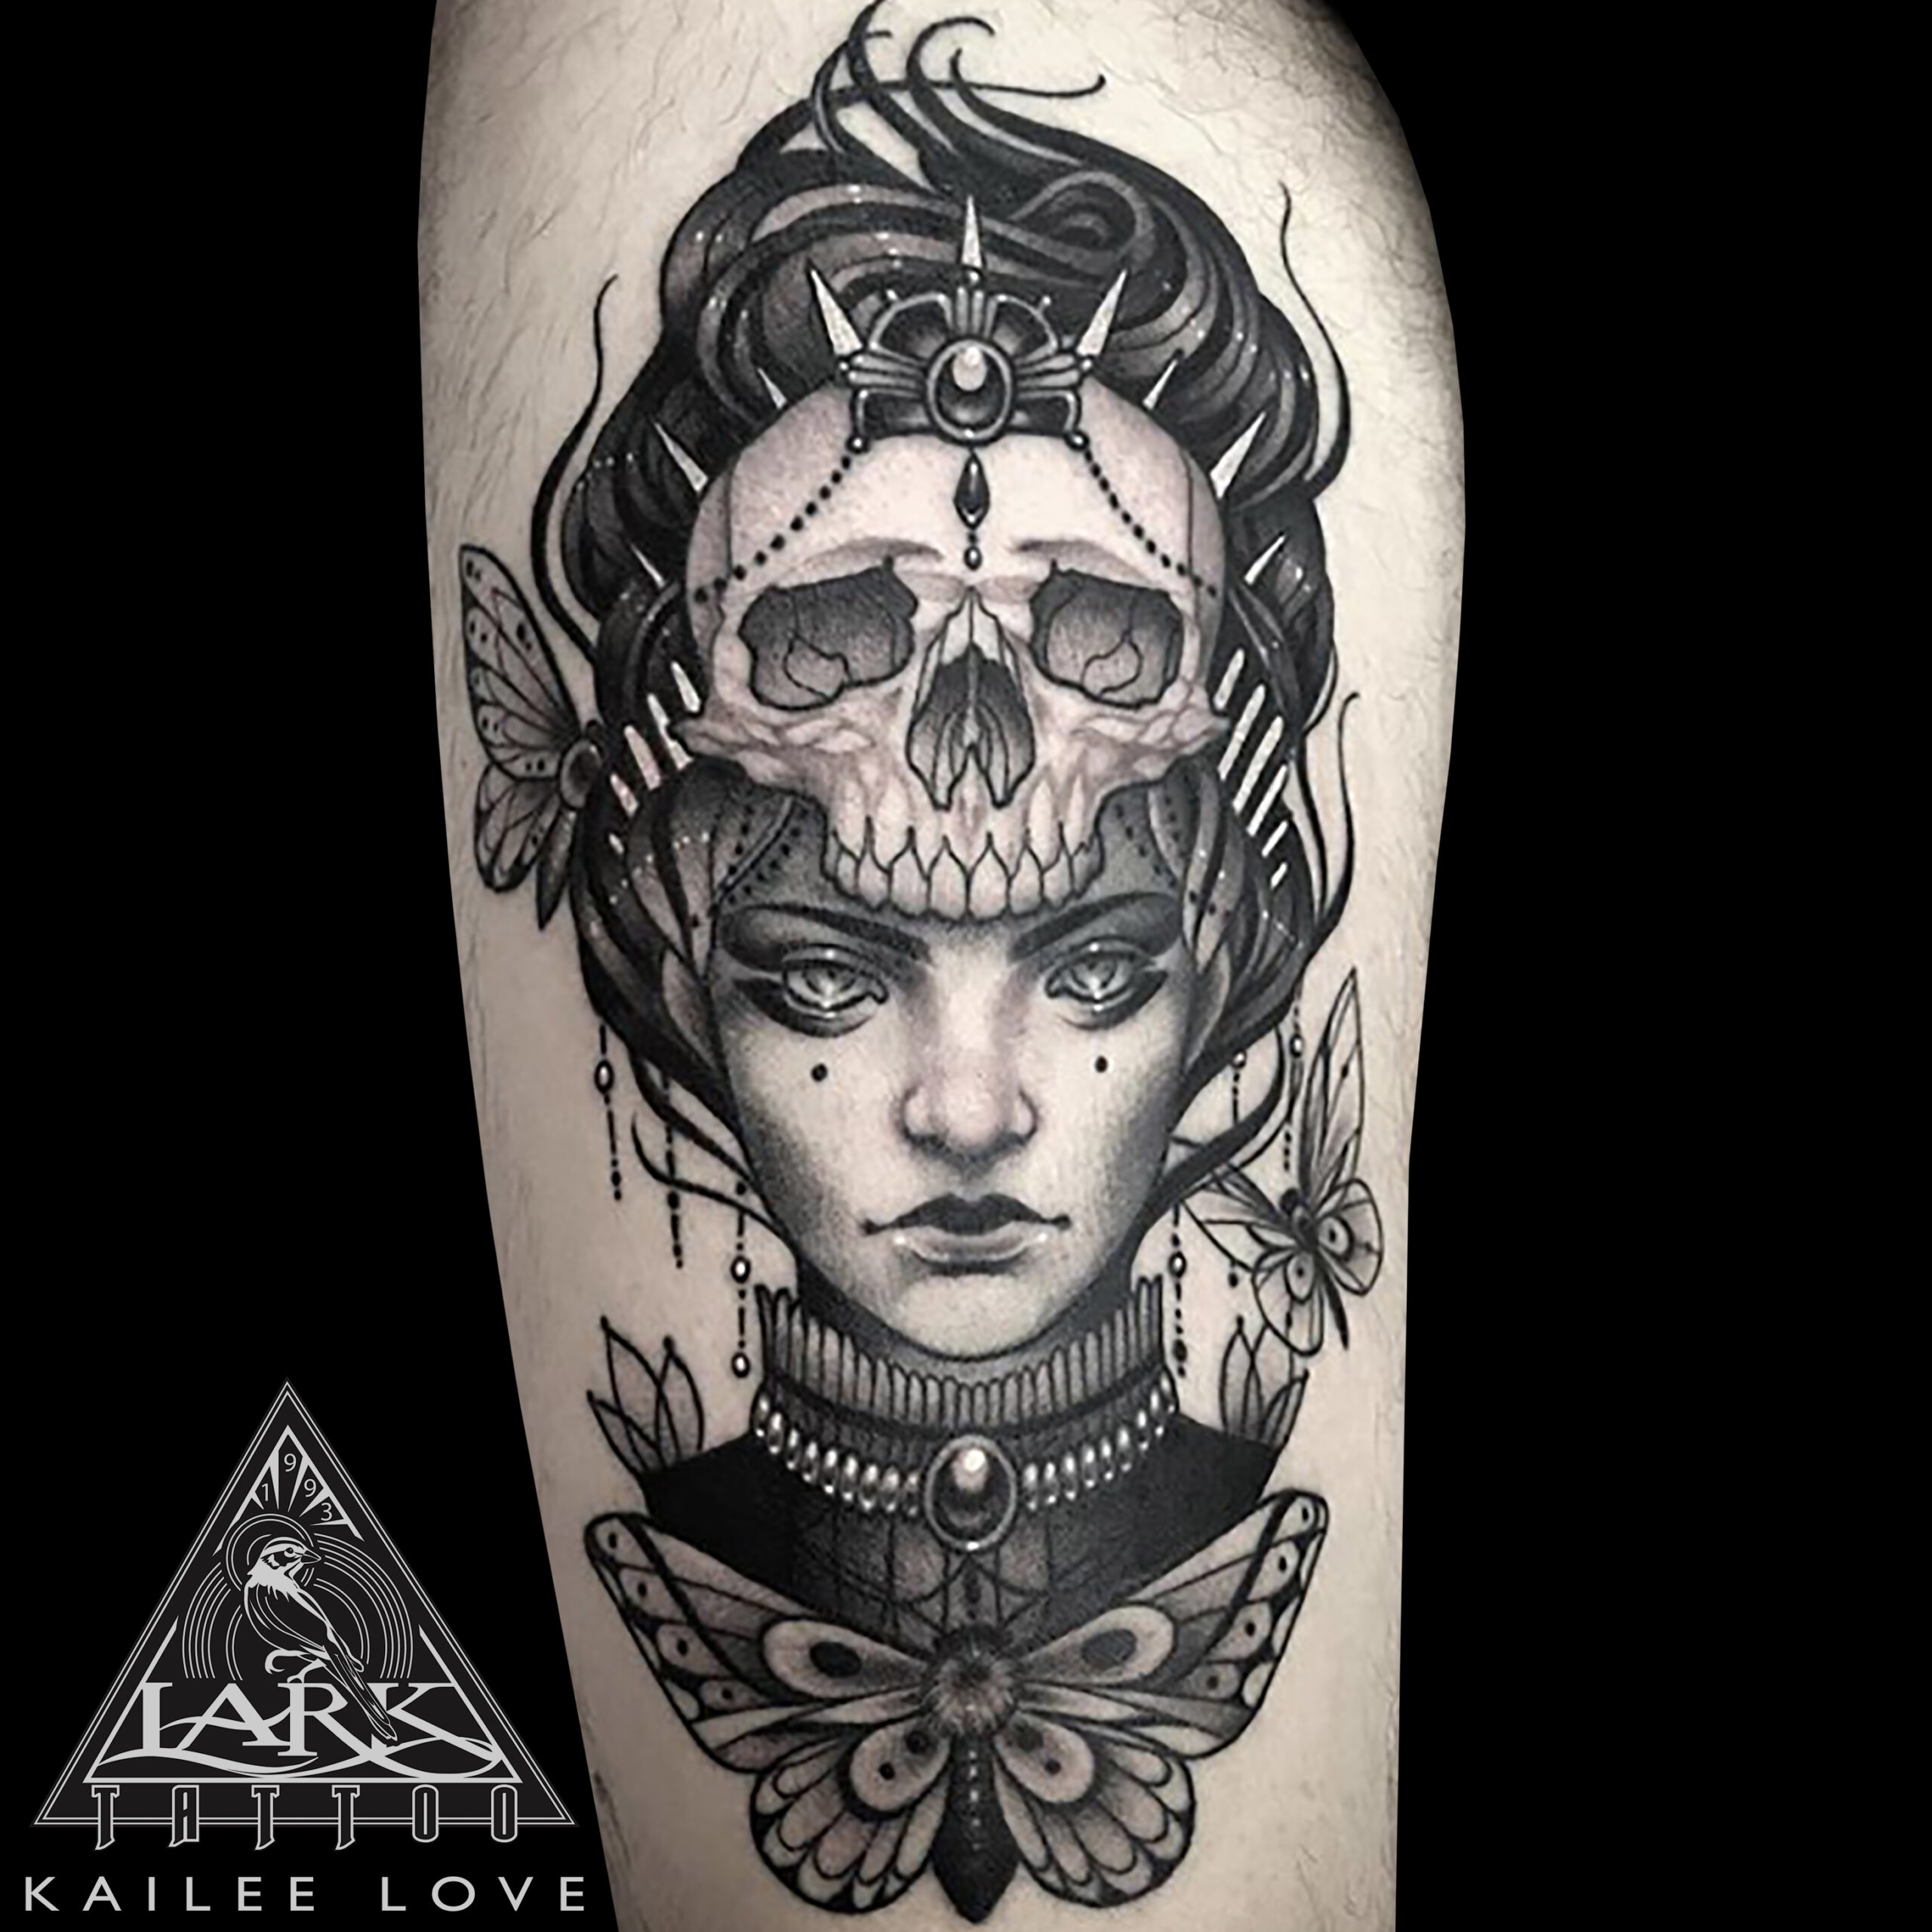 Awesome tattoo done by our artist Kailee Love - -